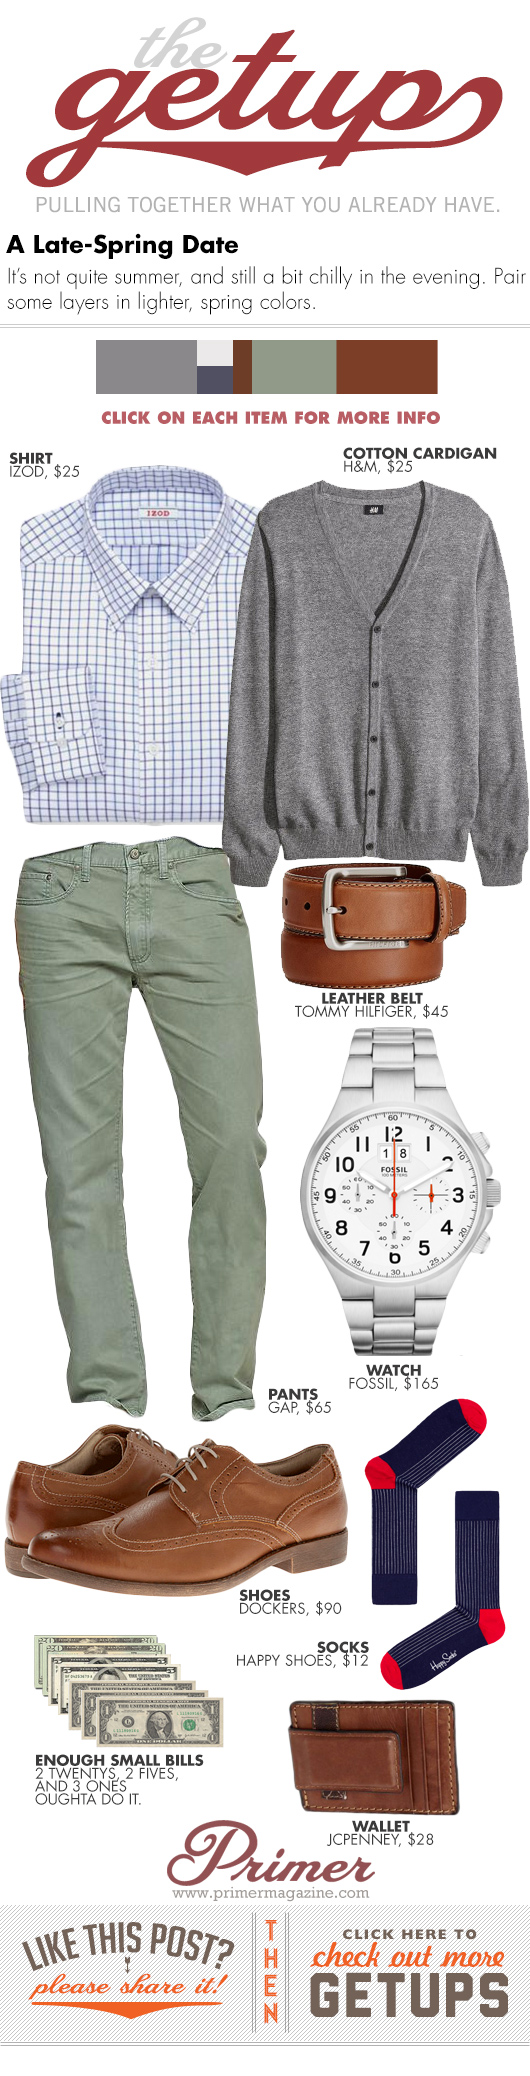 Getup Late Spring Date - Cardigan sweater, check shirt, green pants